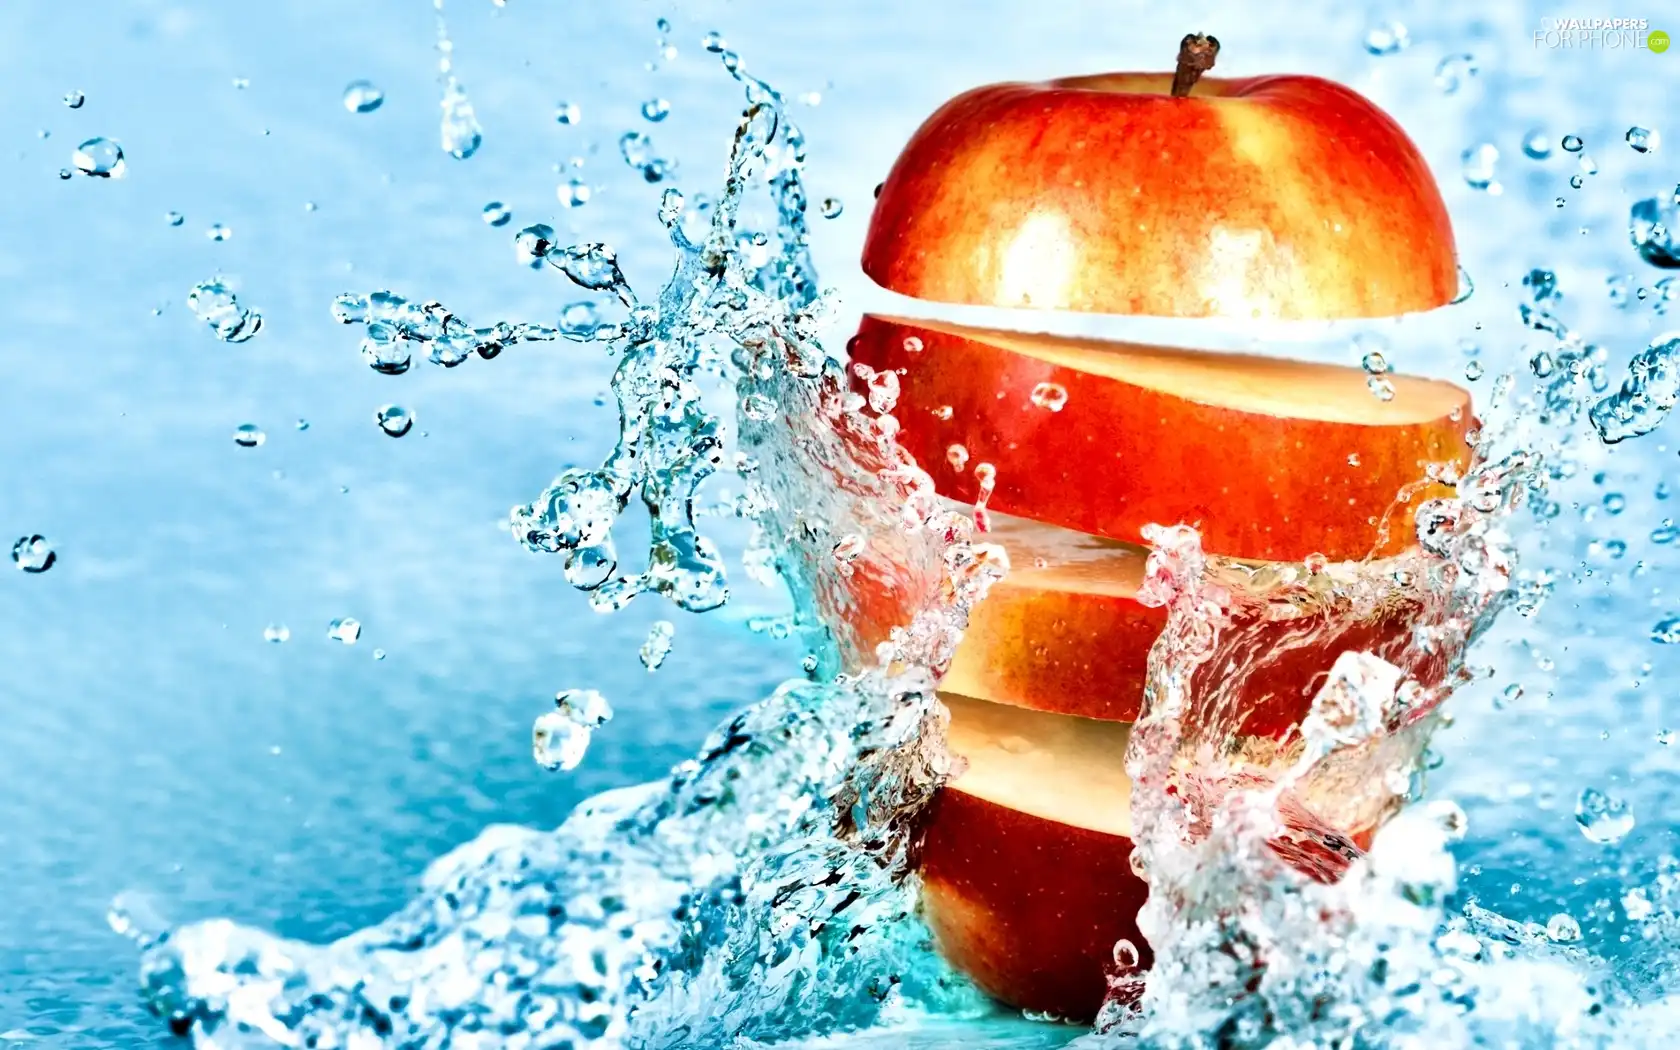 water, Apple, slices